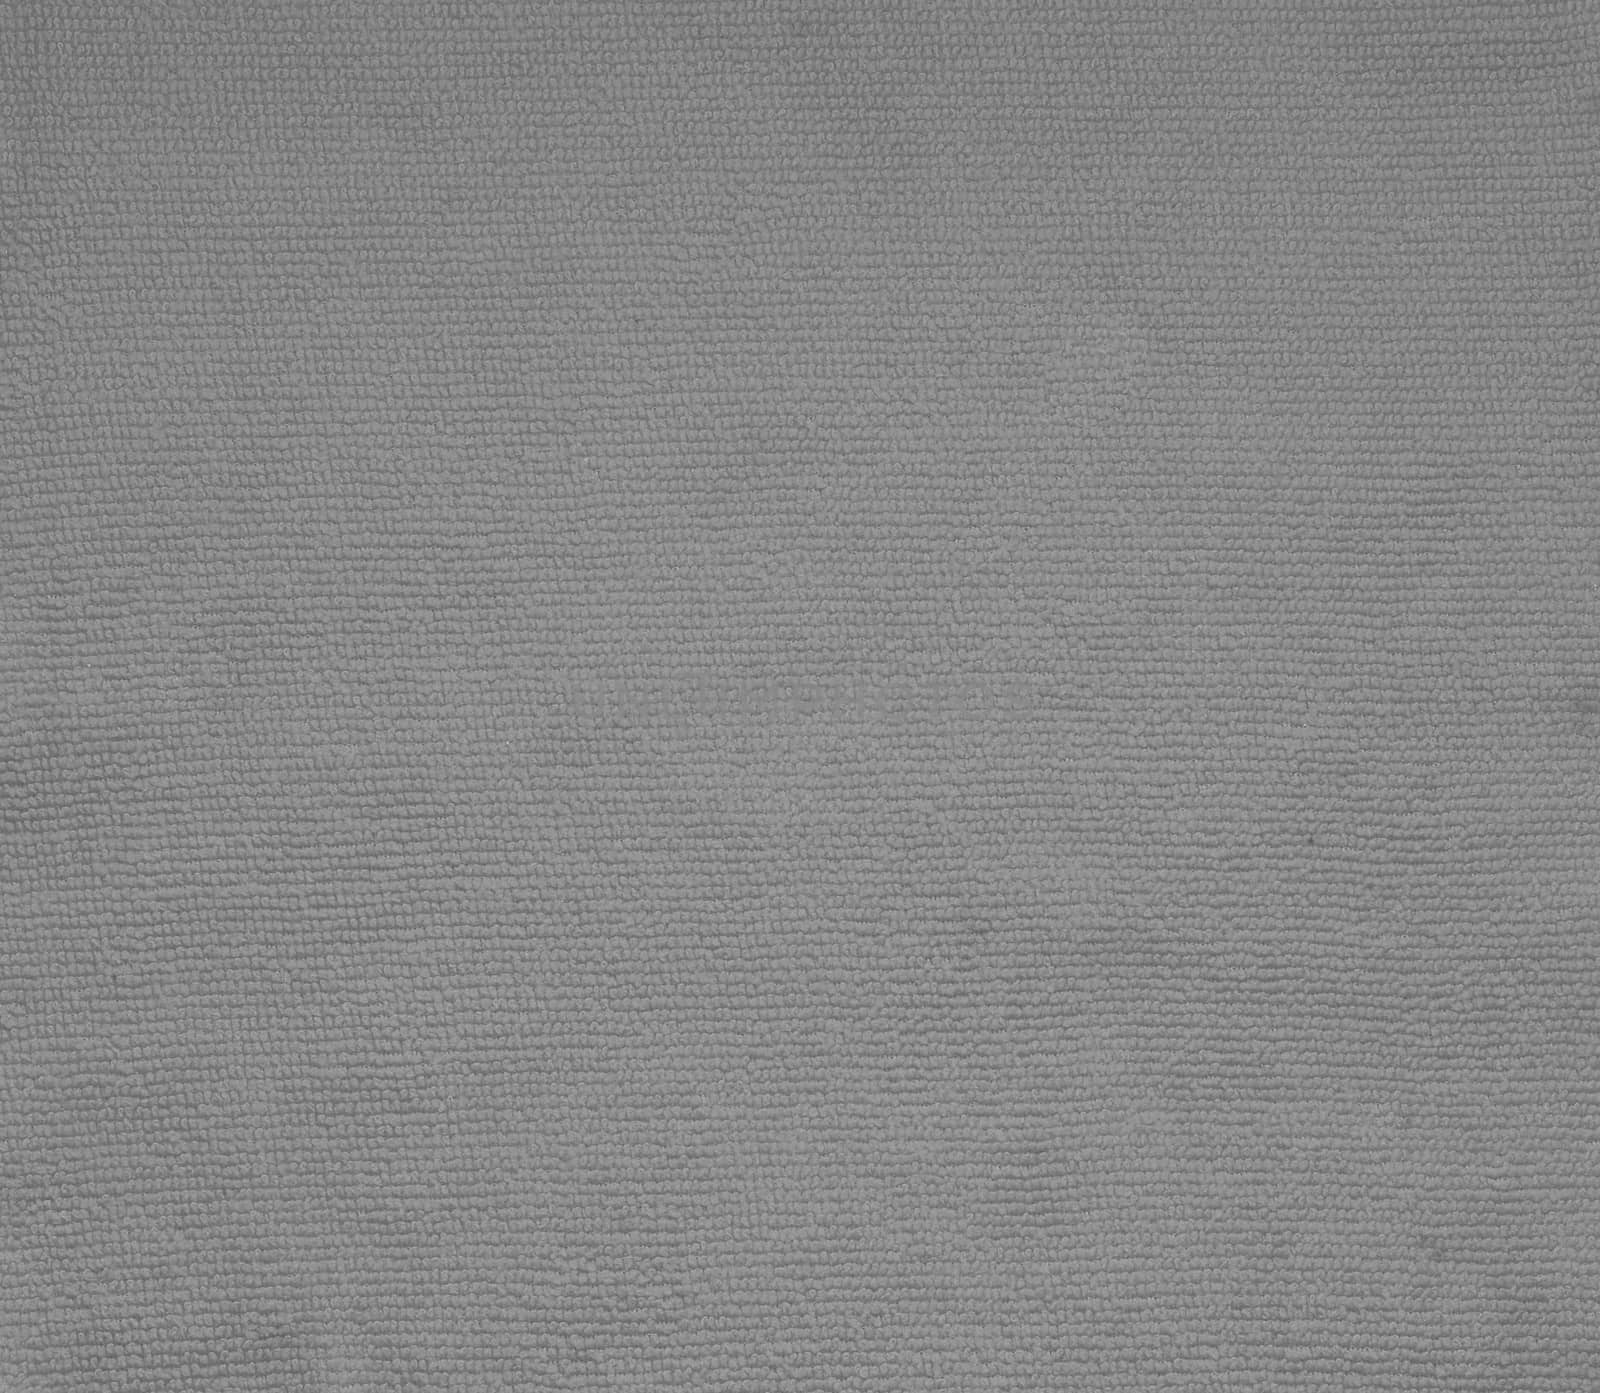 surface grey fabric for background by phochi